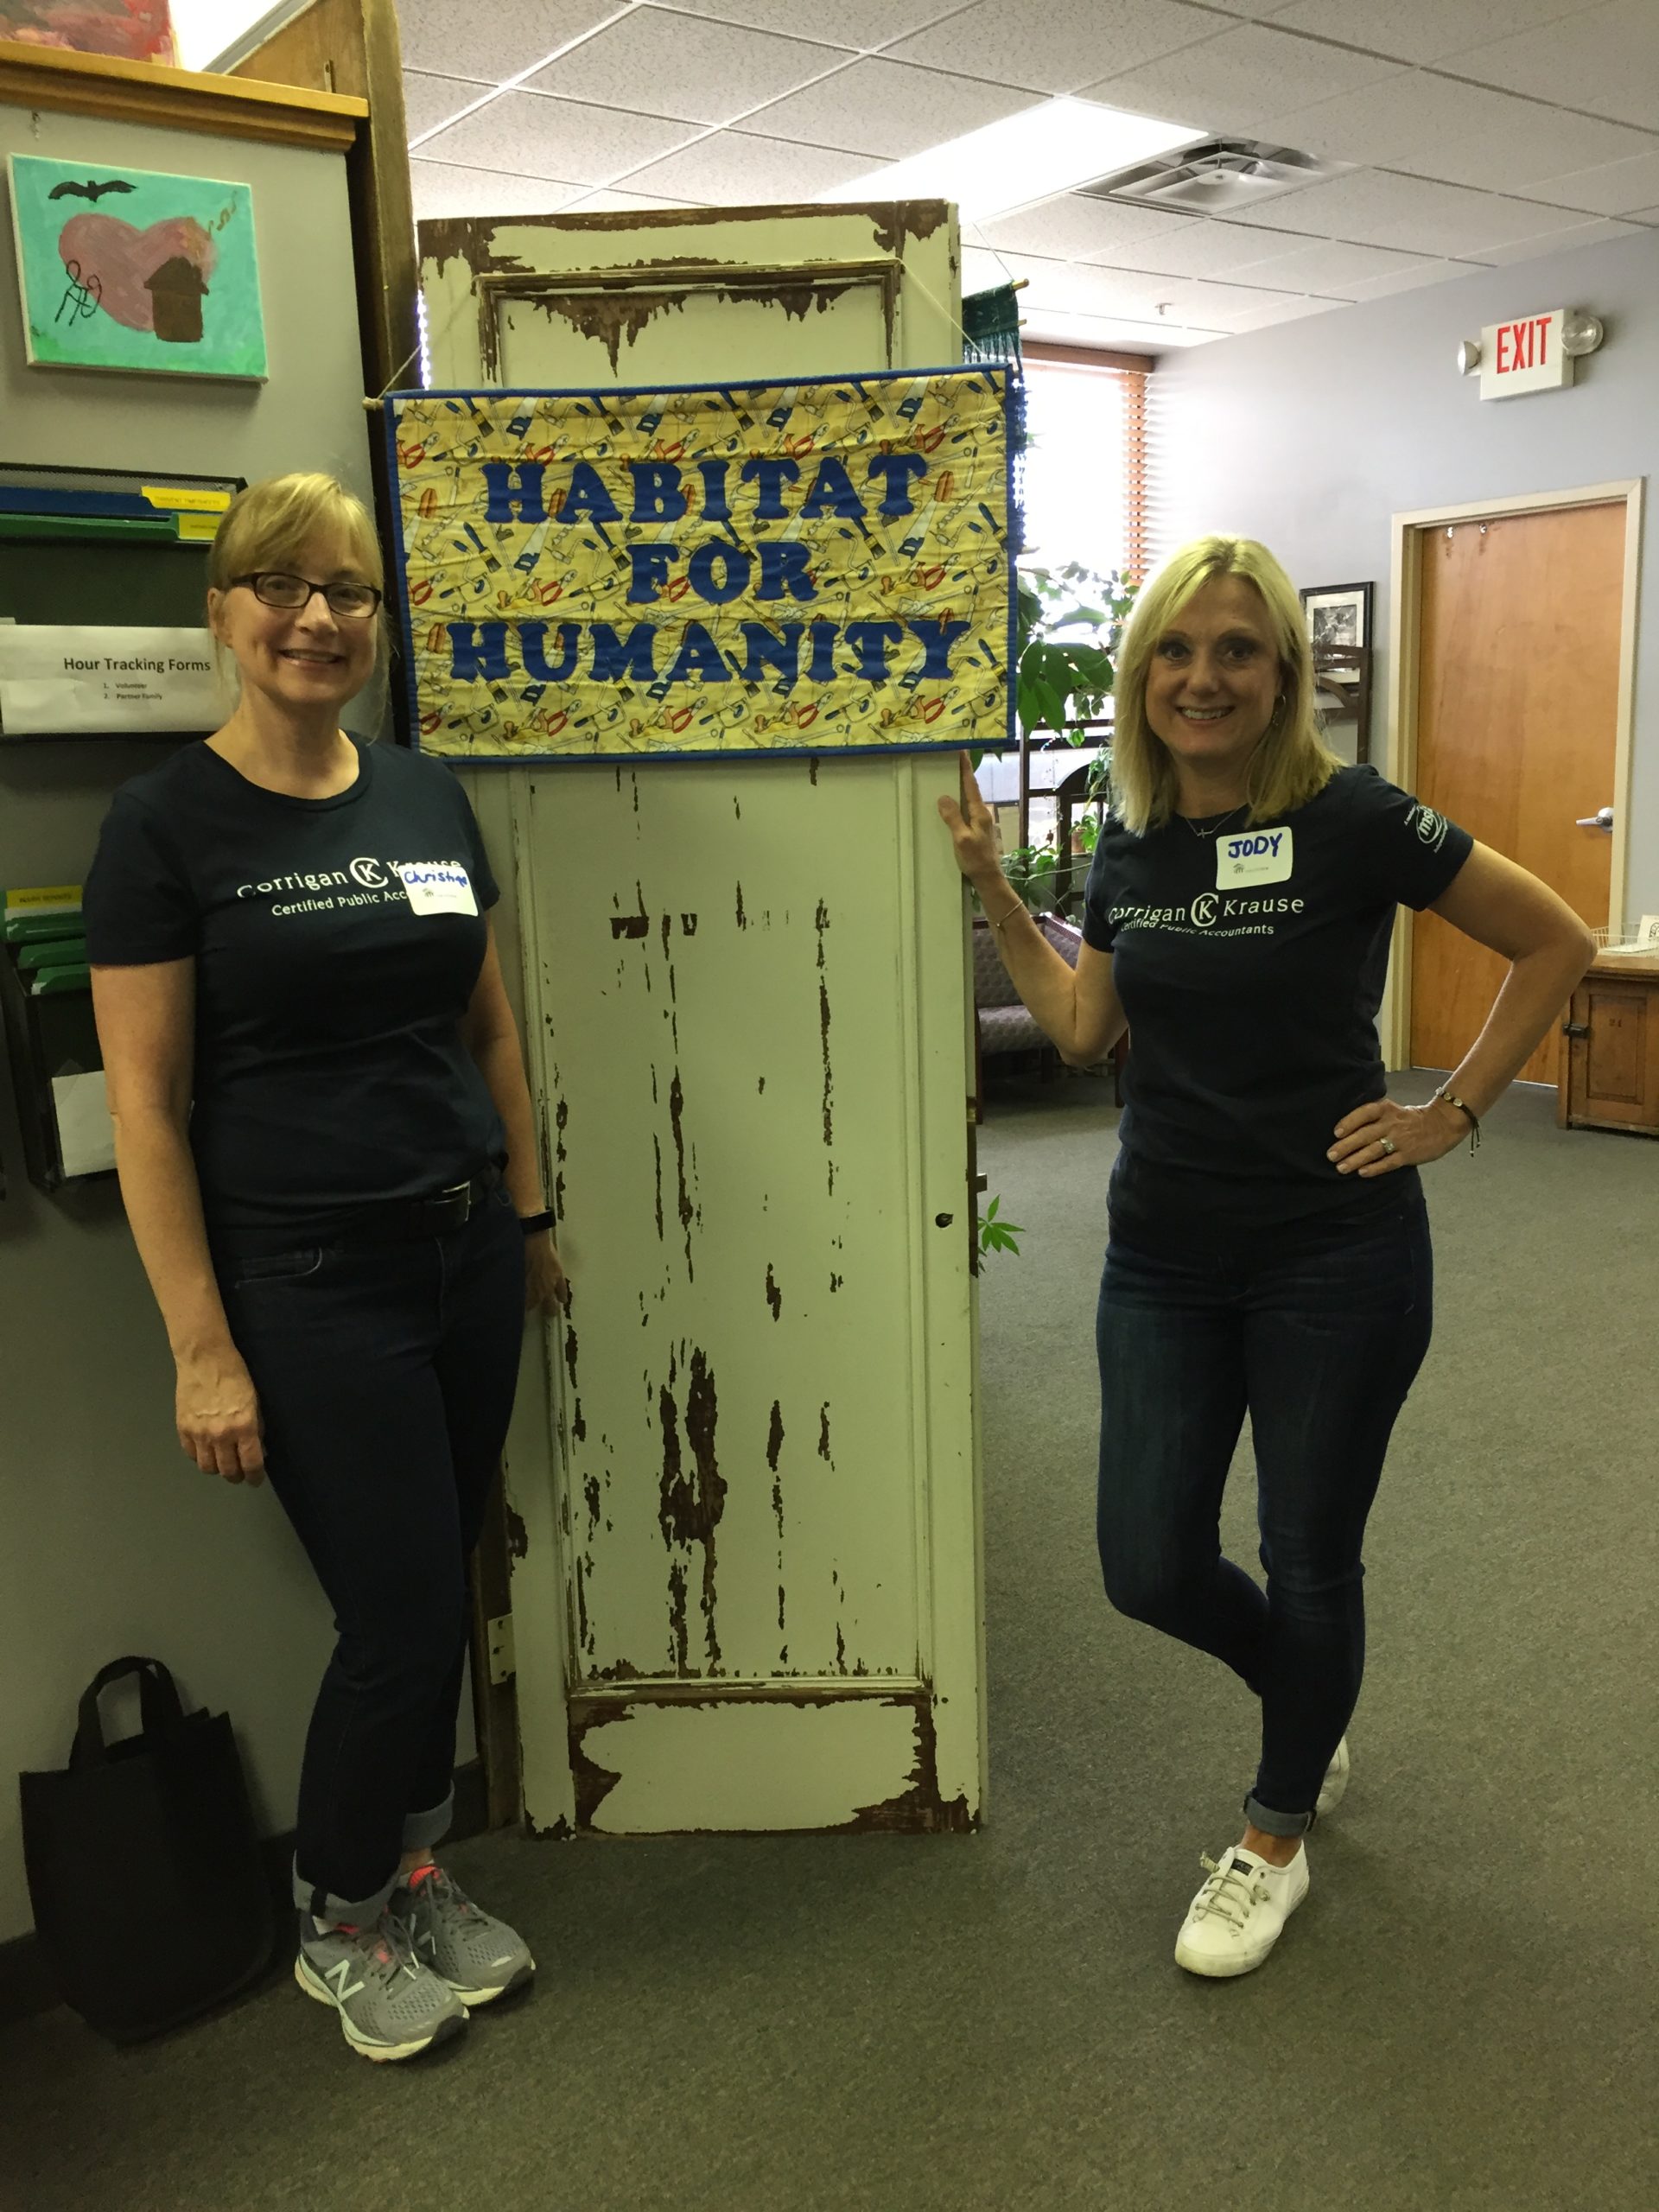 Photo of two women standing in front of a sign that reads "Habitat for Humanity"